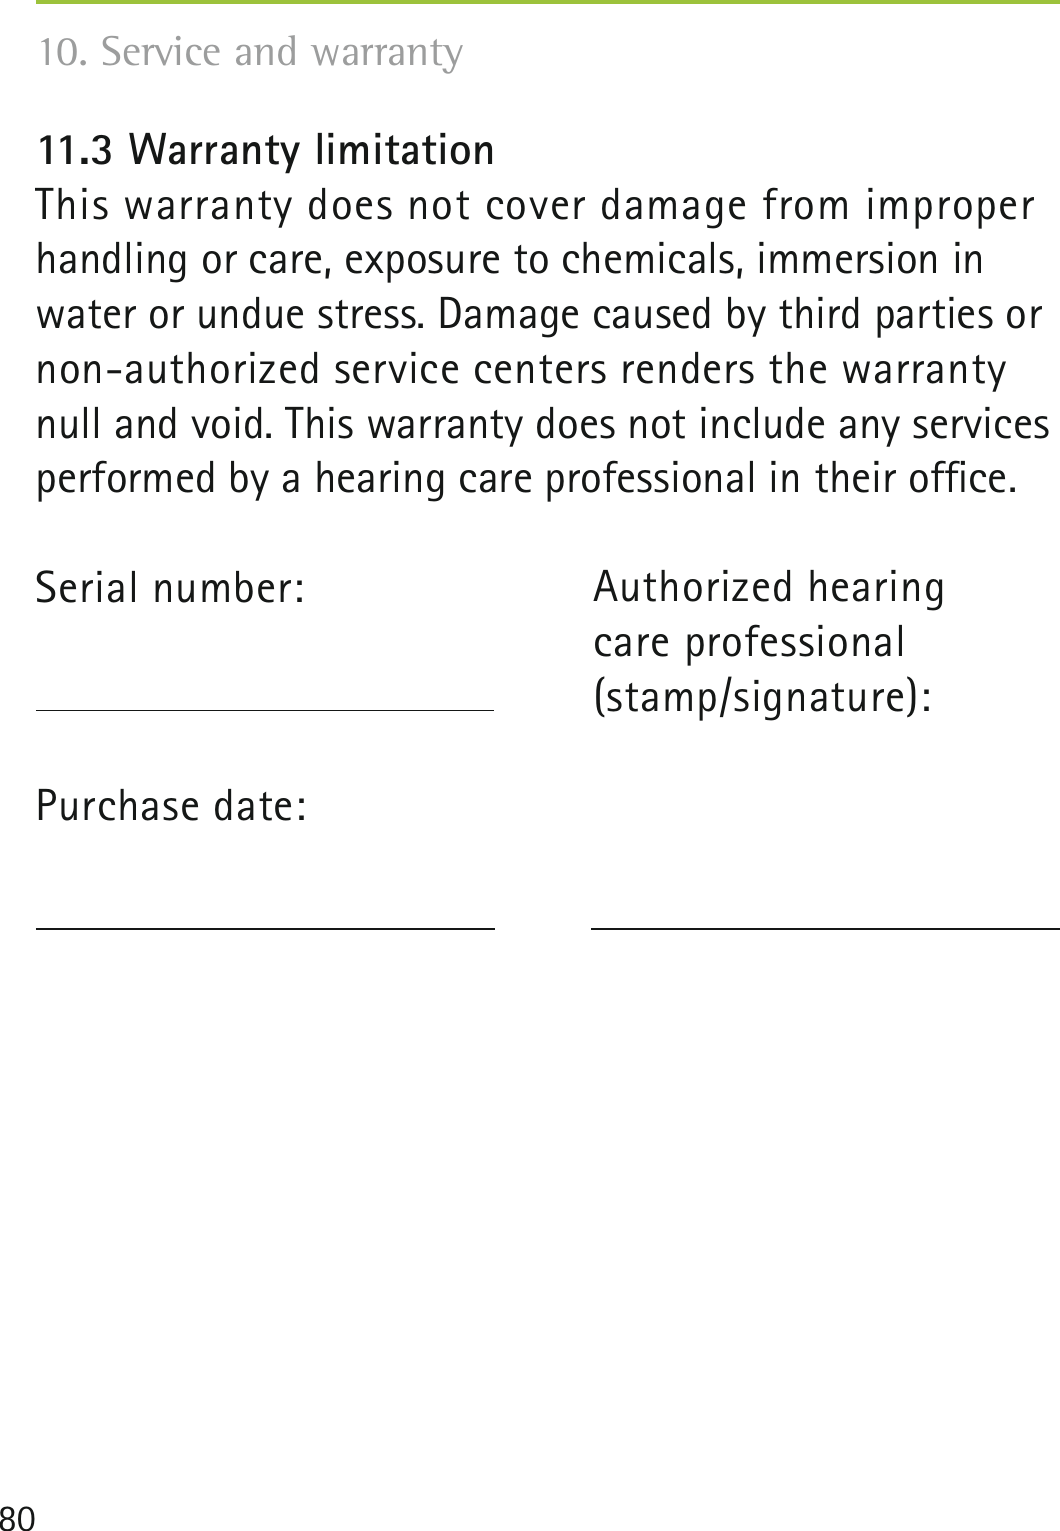 8010. Service and warranty 11.3 Warranty limitationThis warranty does not cover damage from improper handling or care, exposure to chemicals, immersion in water or undue stress. Damage caused by third parties or non-authorized service centers renders the warranty null and void. This warranty does not include any services performed by a hearing care professional in their ofﬁce.Serial number:   Purchase date: Authorized hearing  care professional(stamp/signature):